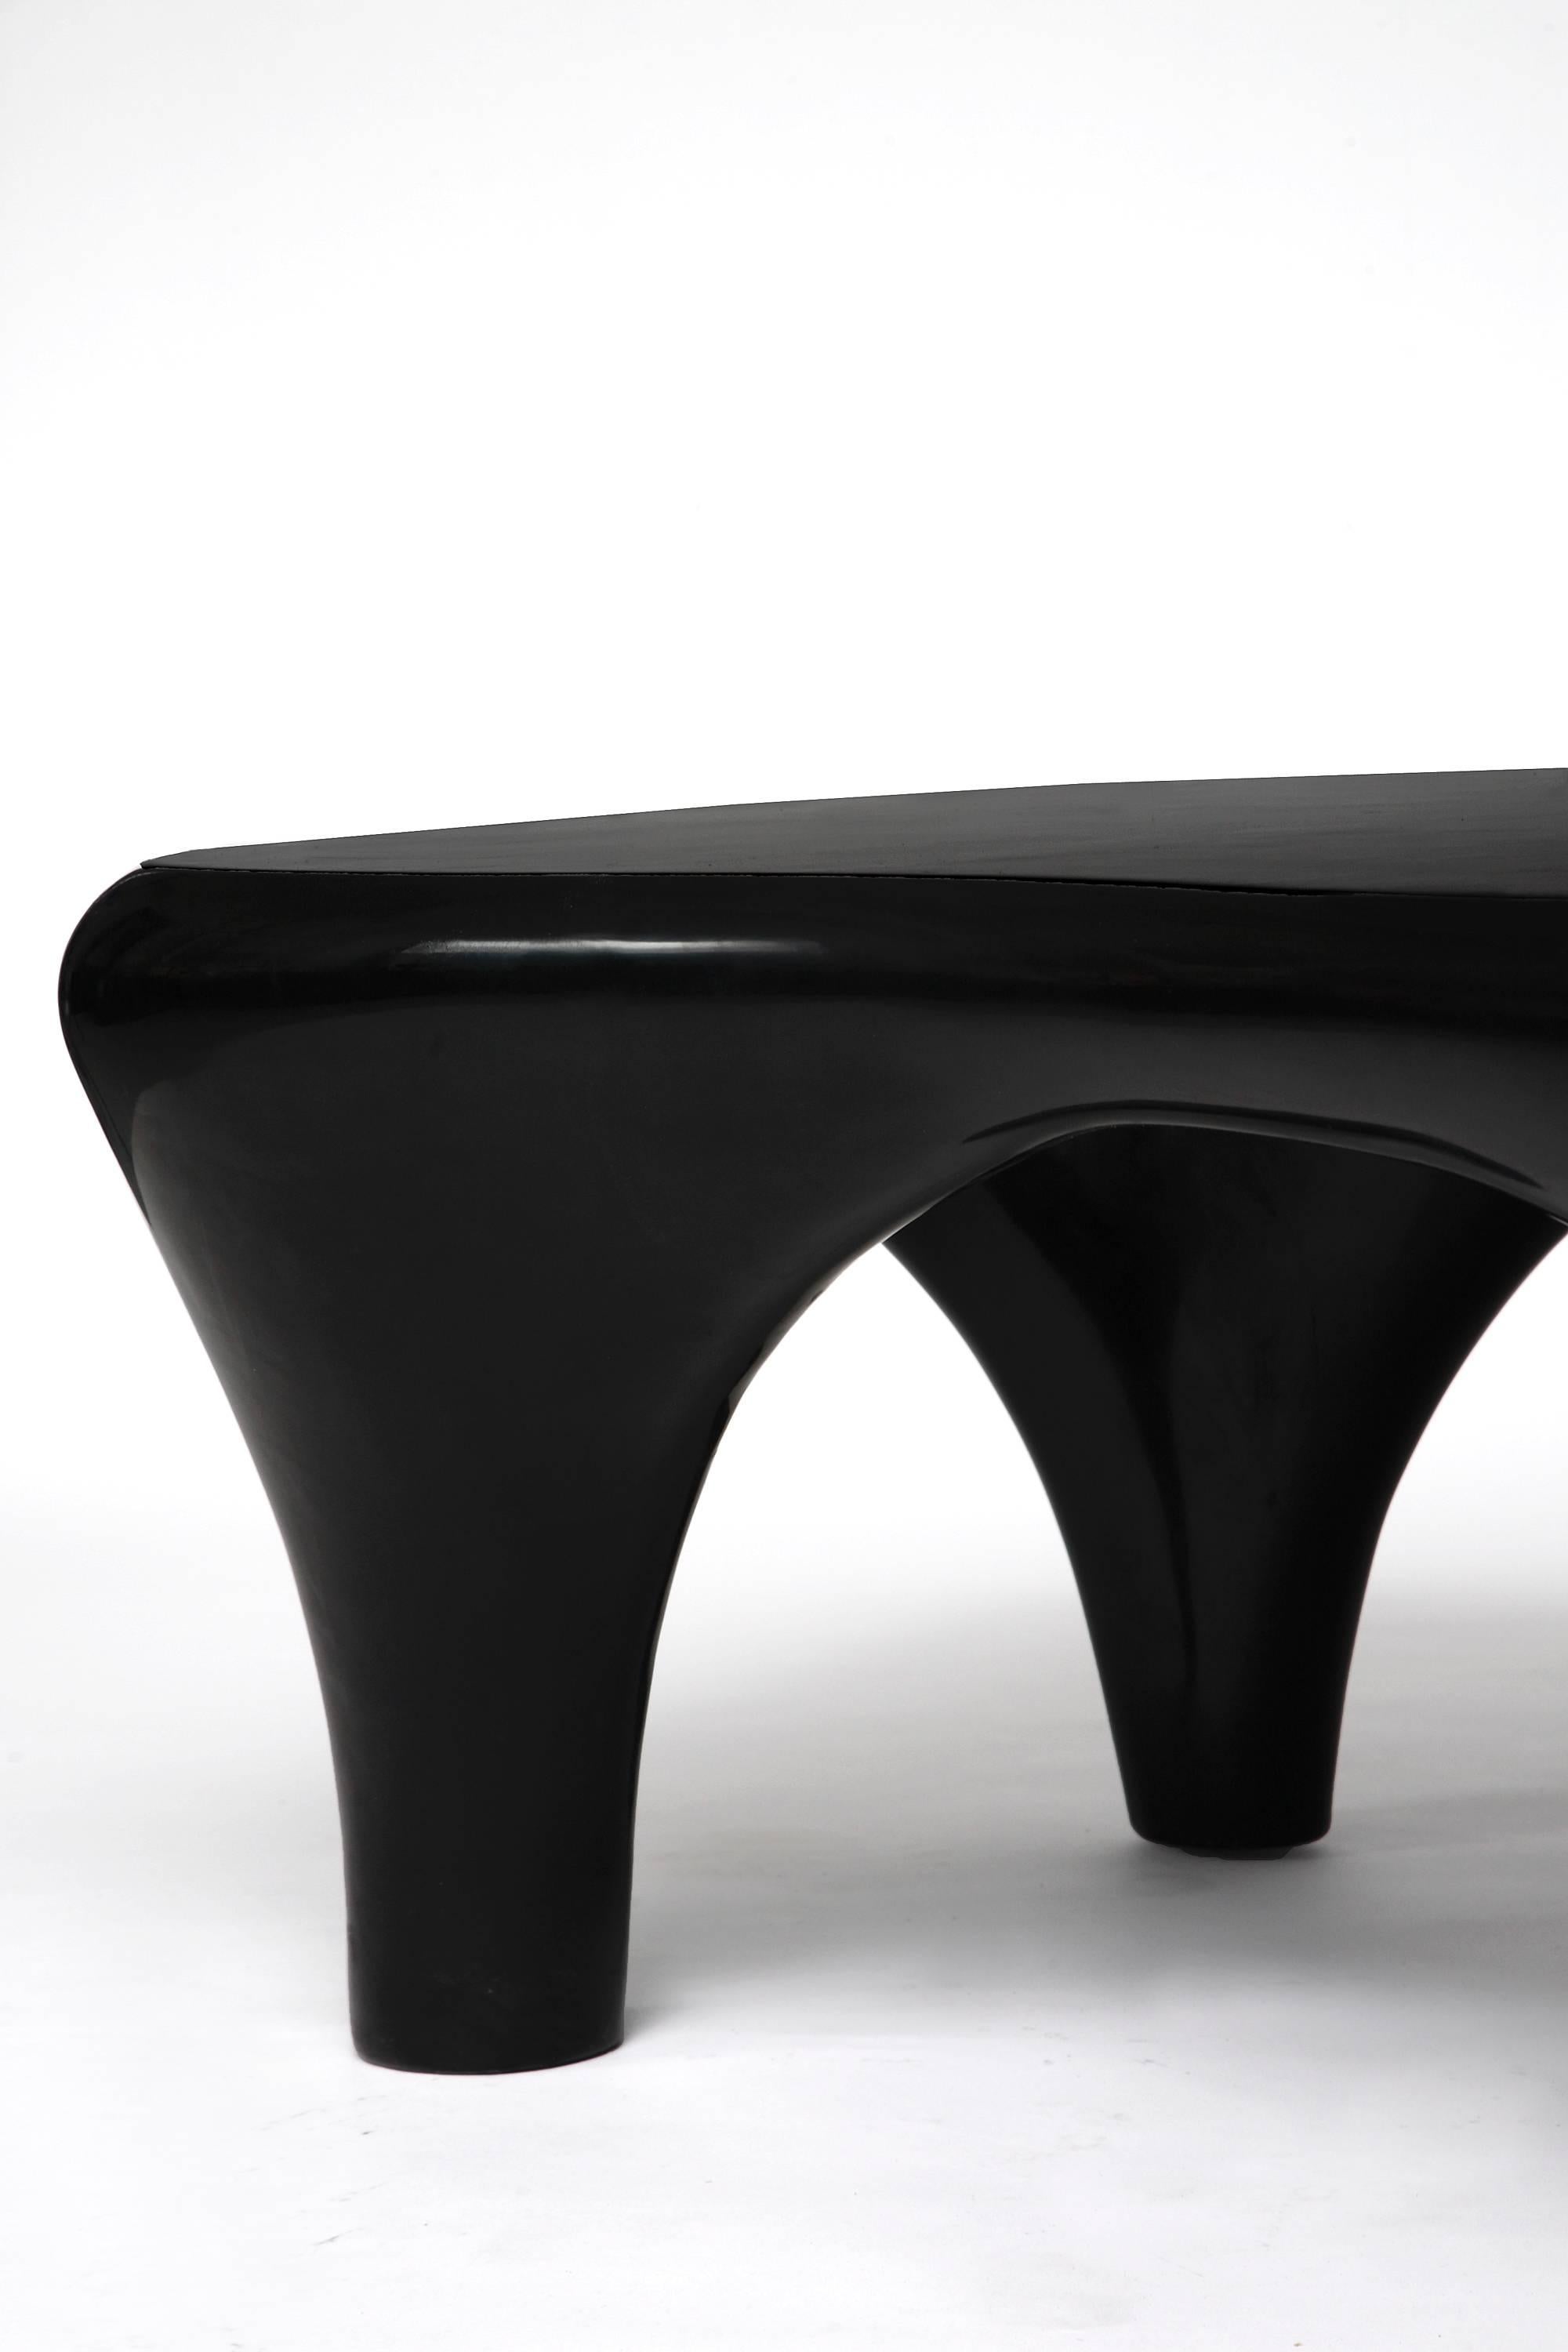 Lacquered Hand Lacquer Sculptural Coffee Table by Jacques Jarrige, 2015 For Sale